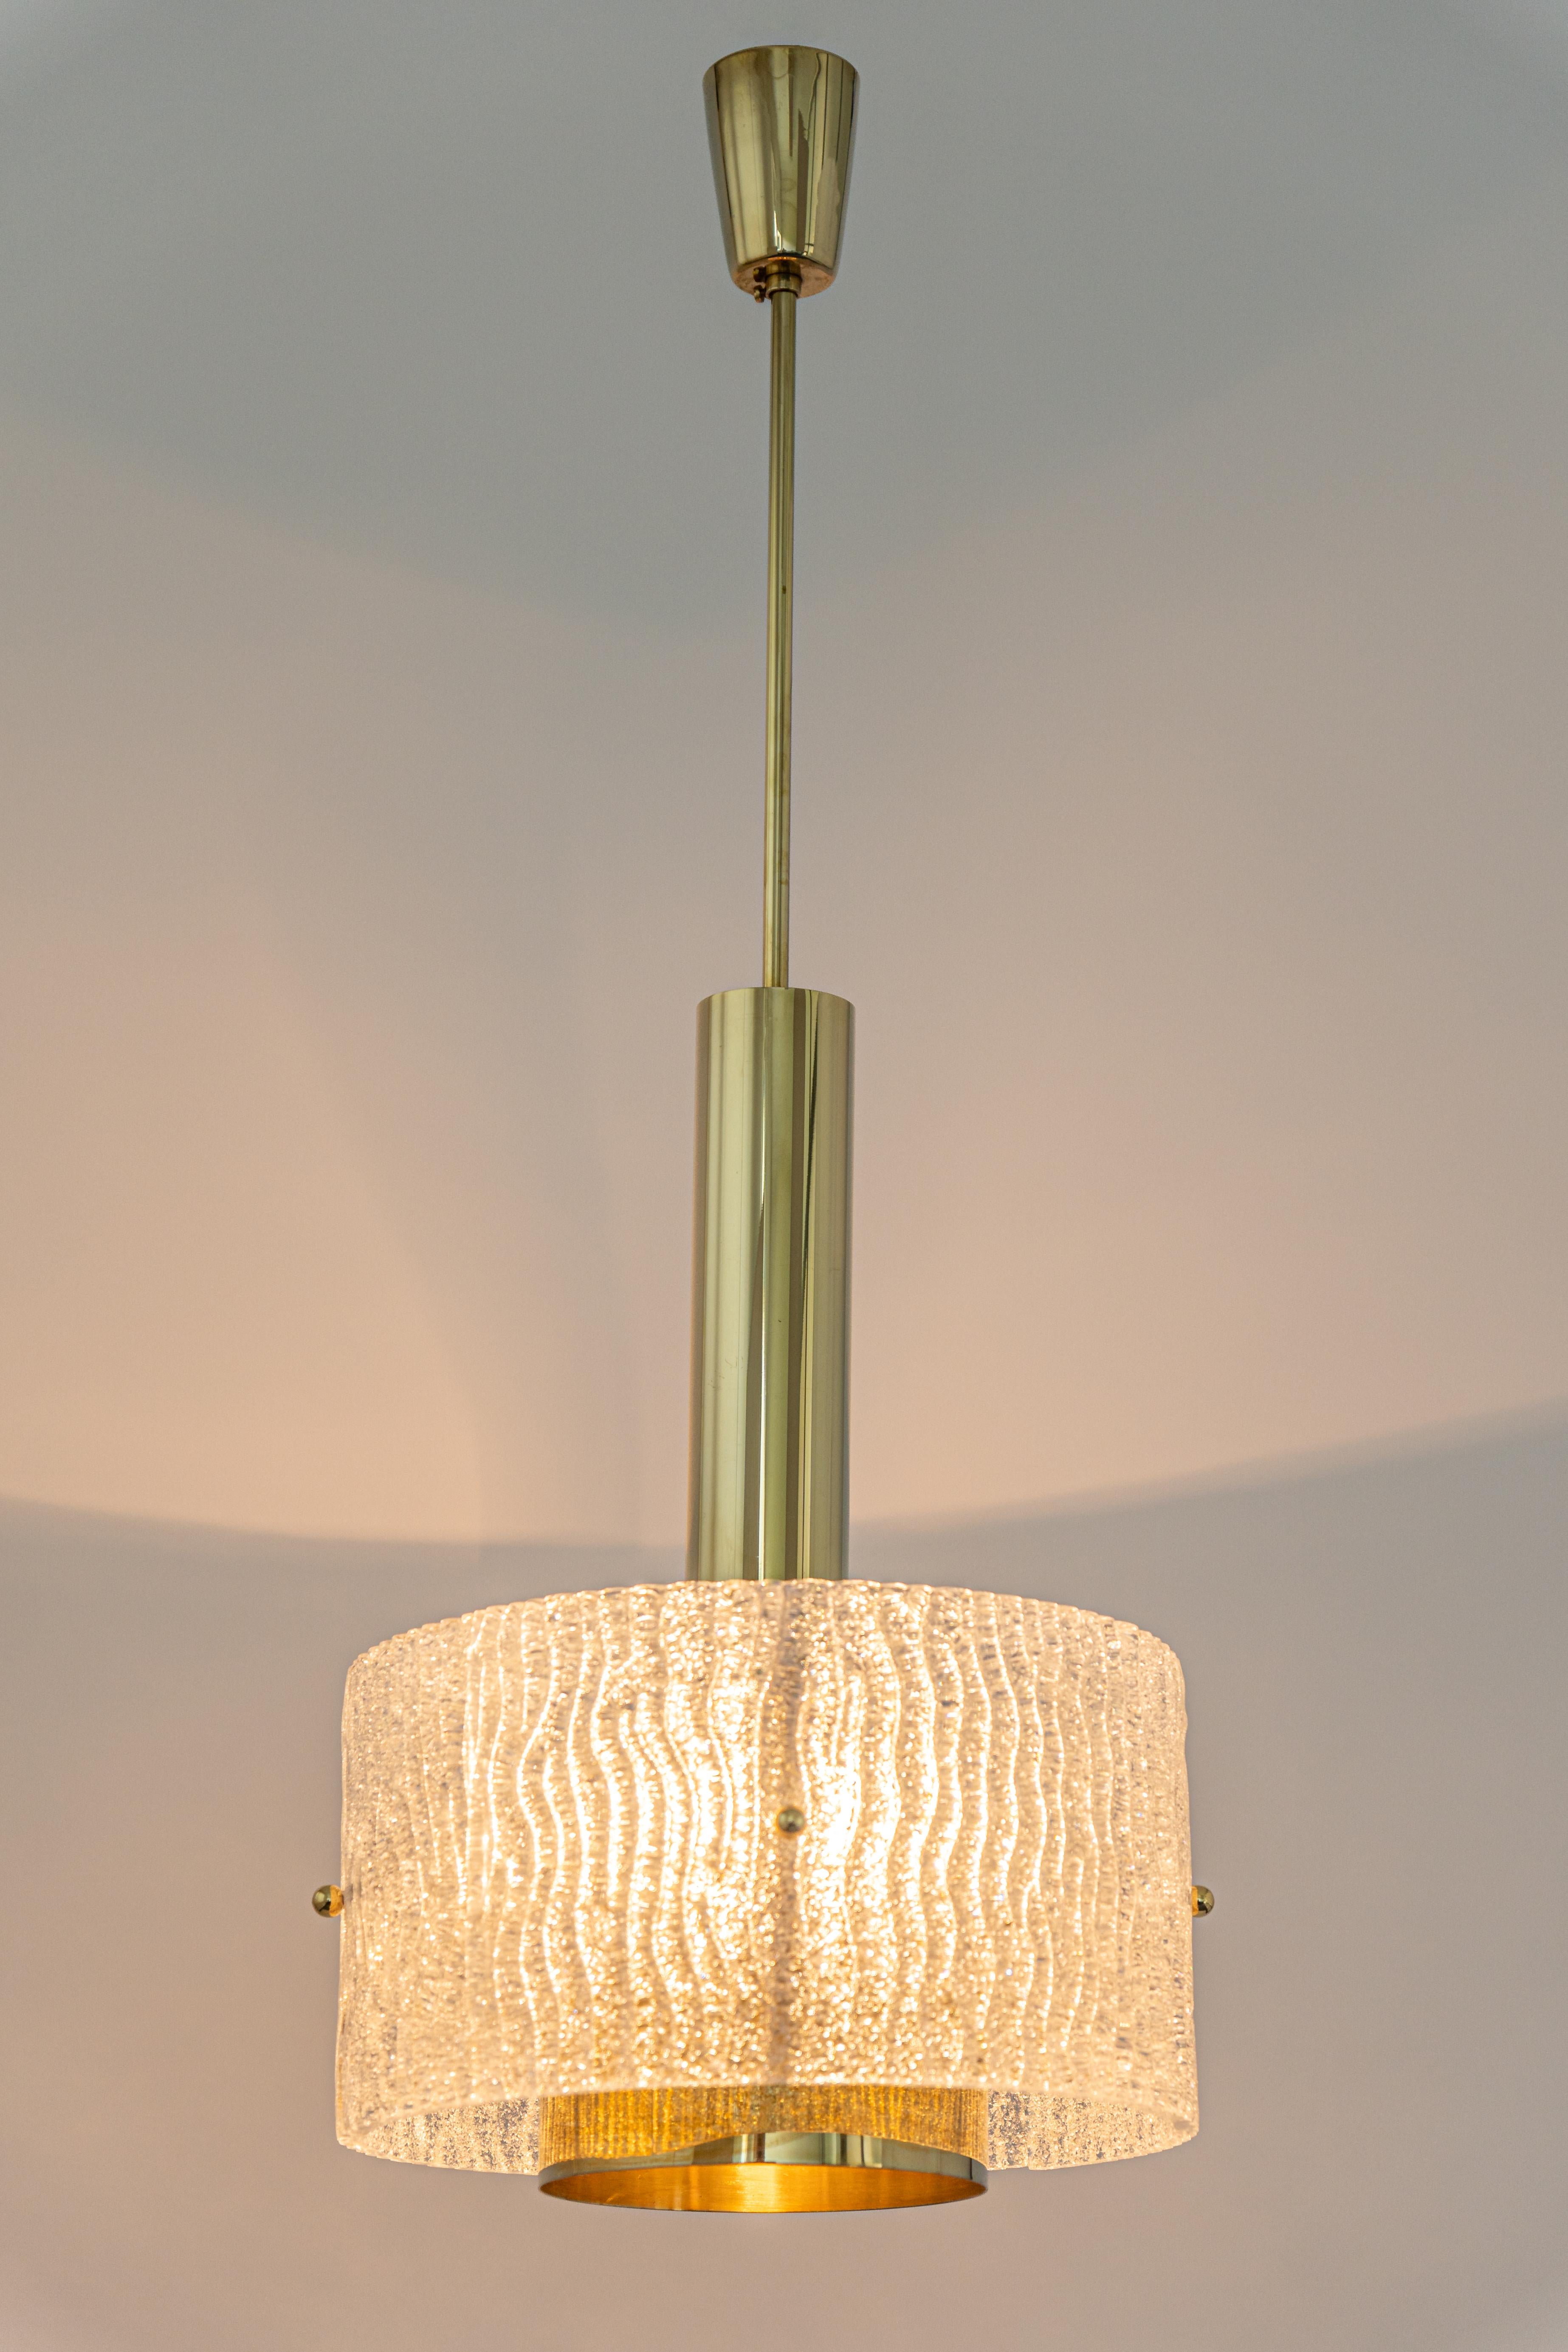 Large Murano Pendant Lights by Hillebrand, 1970s For Sale 2